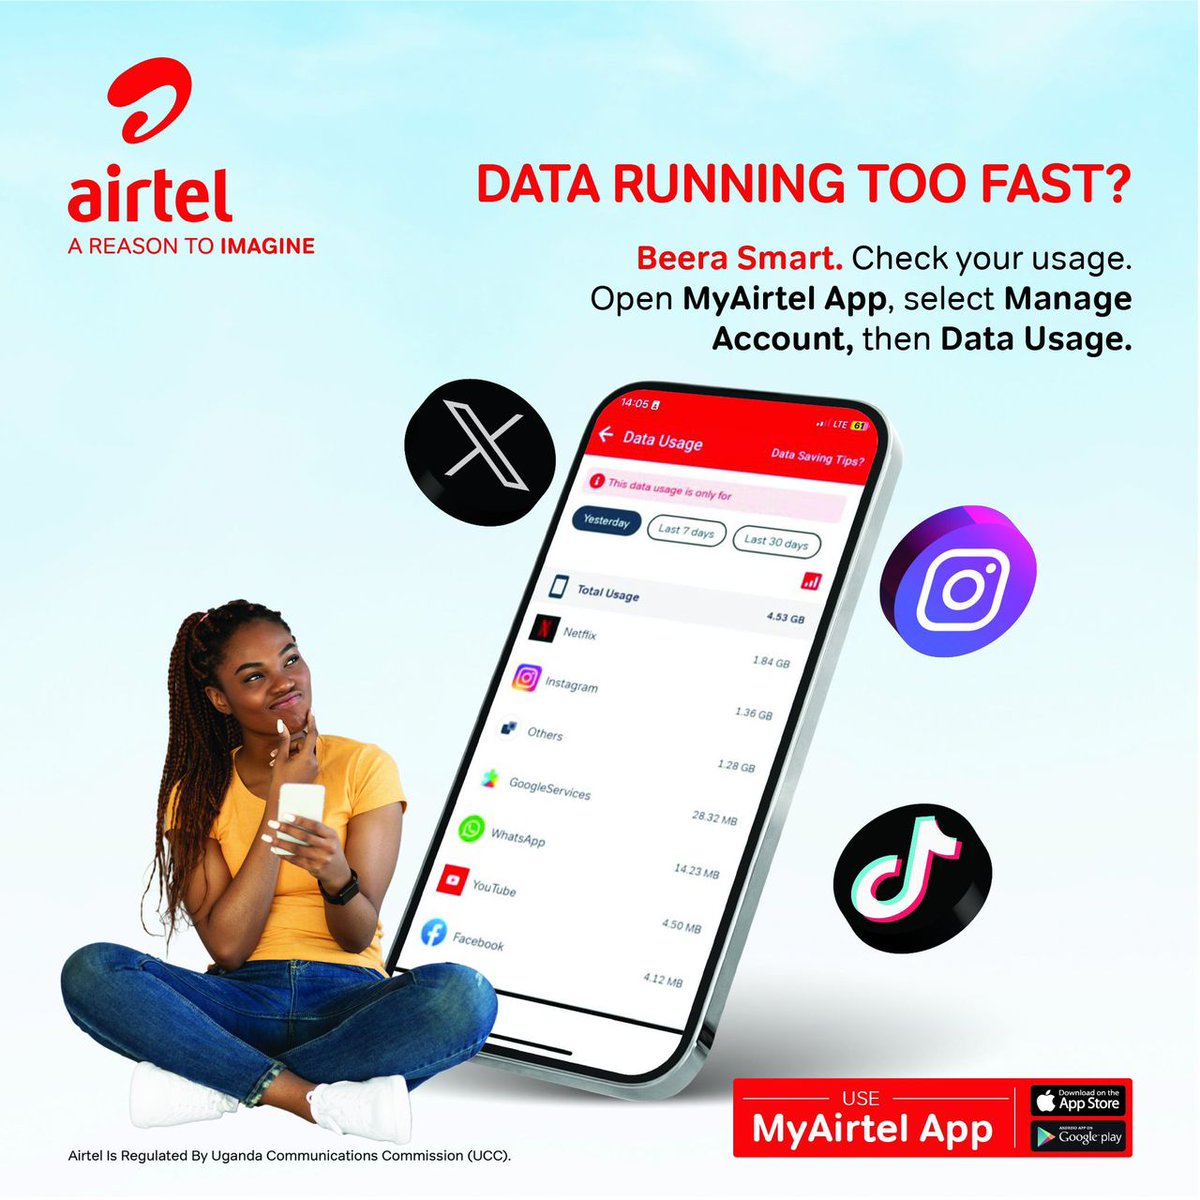 Do you wanna how to manage your data usage ? 
Don't be stressed ....Check on #MyAirtelApp. There is a data usage feature 

Download the App here airtelafrica.onelink.me/cGyr/qgj4qeu2 to start today

#AirtelDataManager